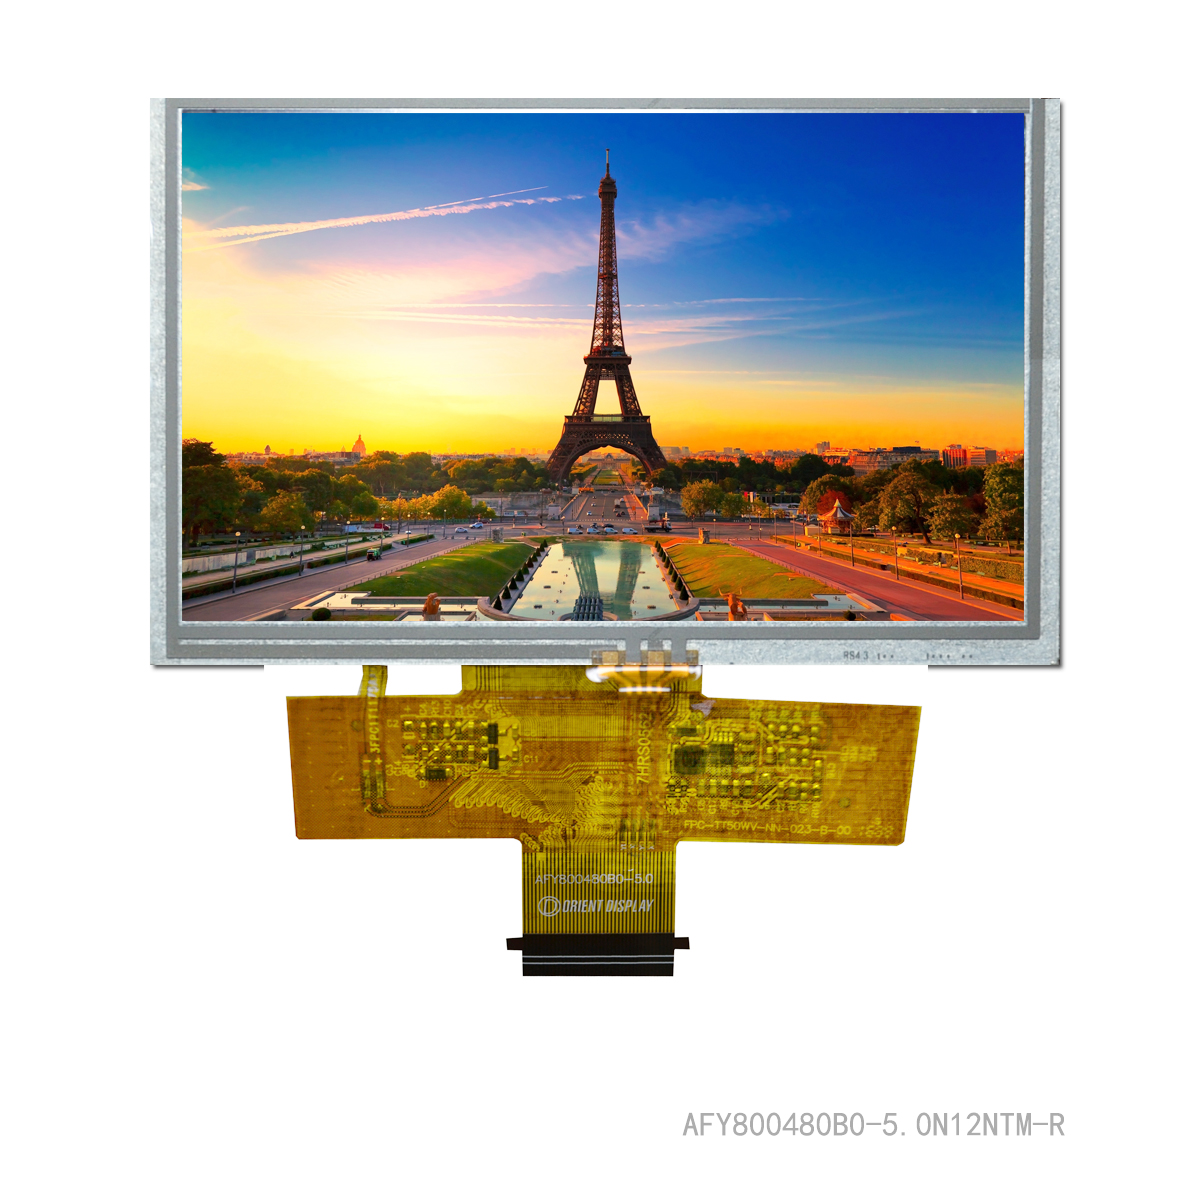 5 0 Tft 800x480 380 Nits With Resistive Touch Panel Store Orient Display